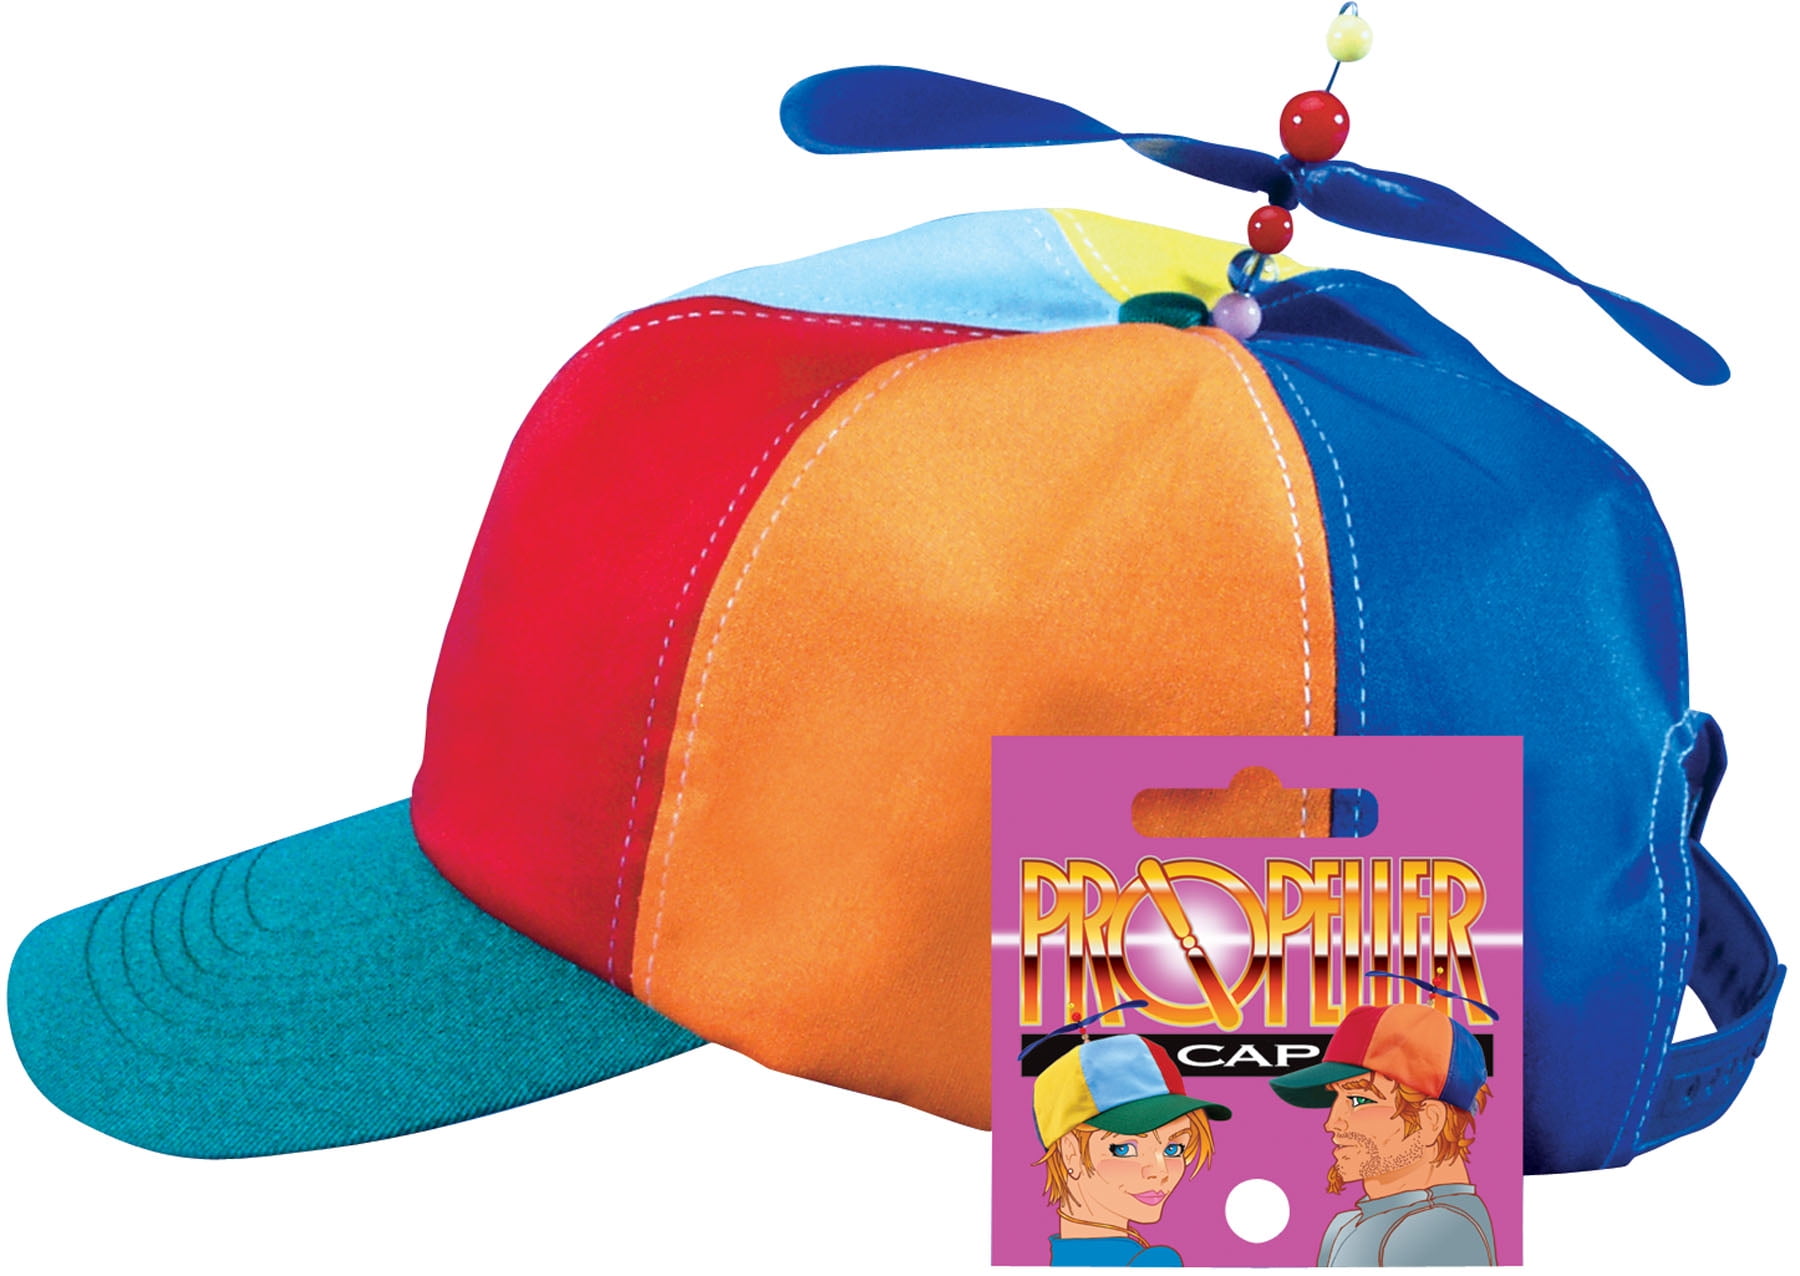 Star Power Baseball Cap with Propeller Funny Party Hat, One Size